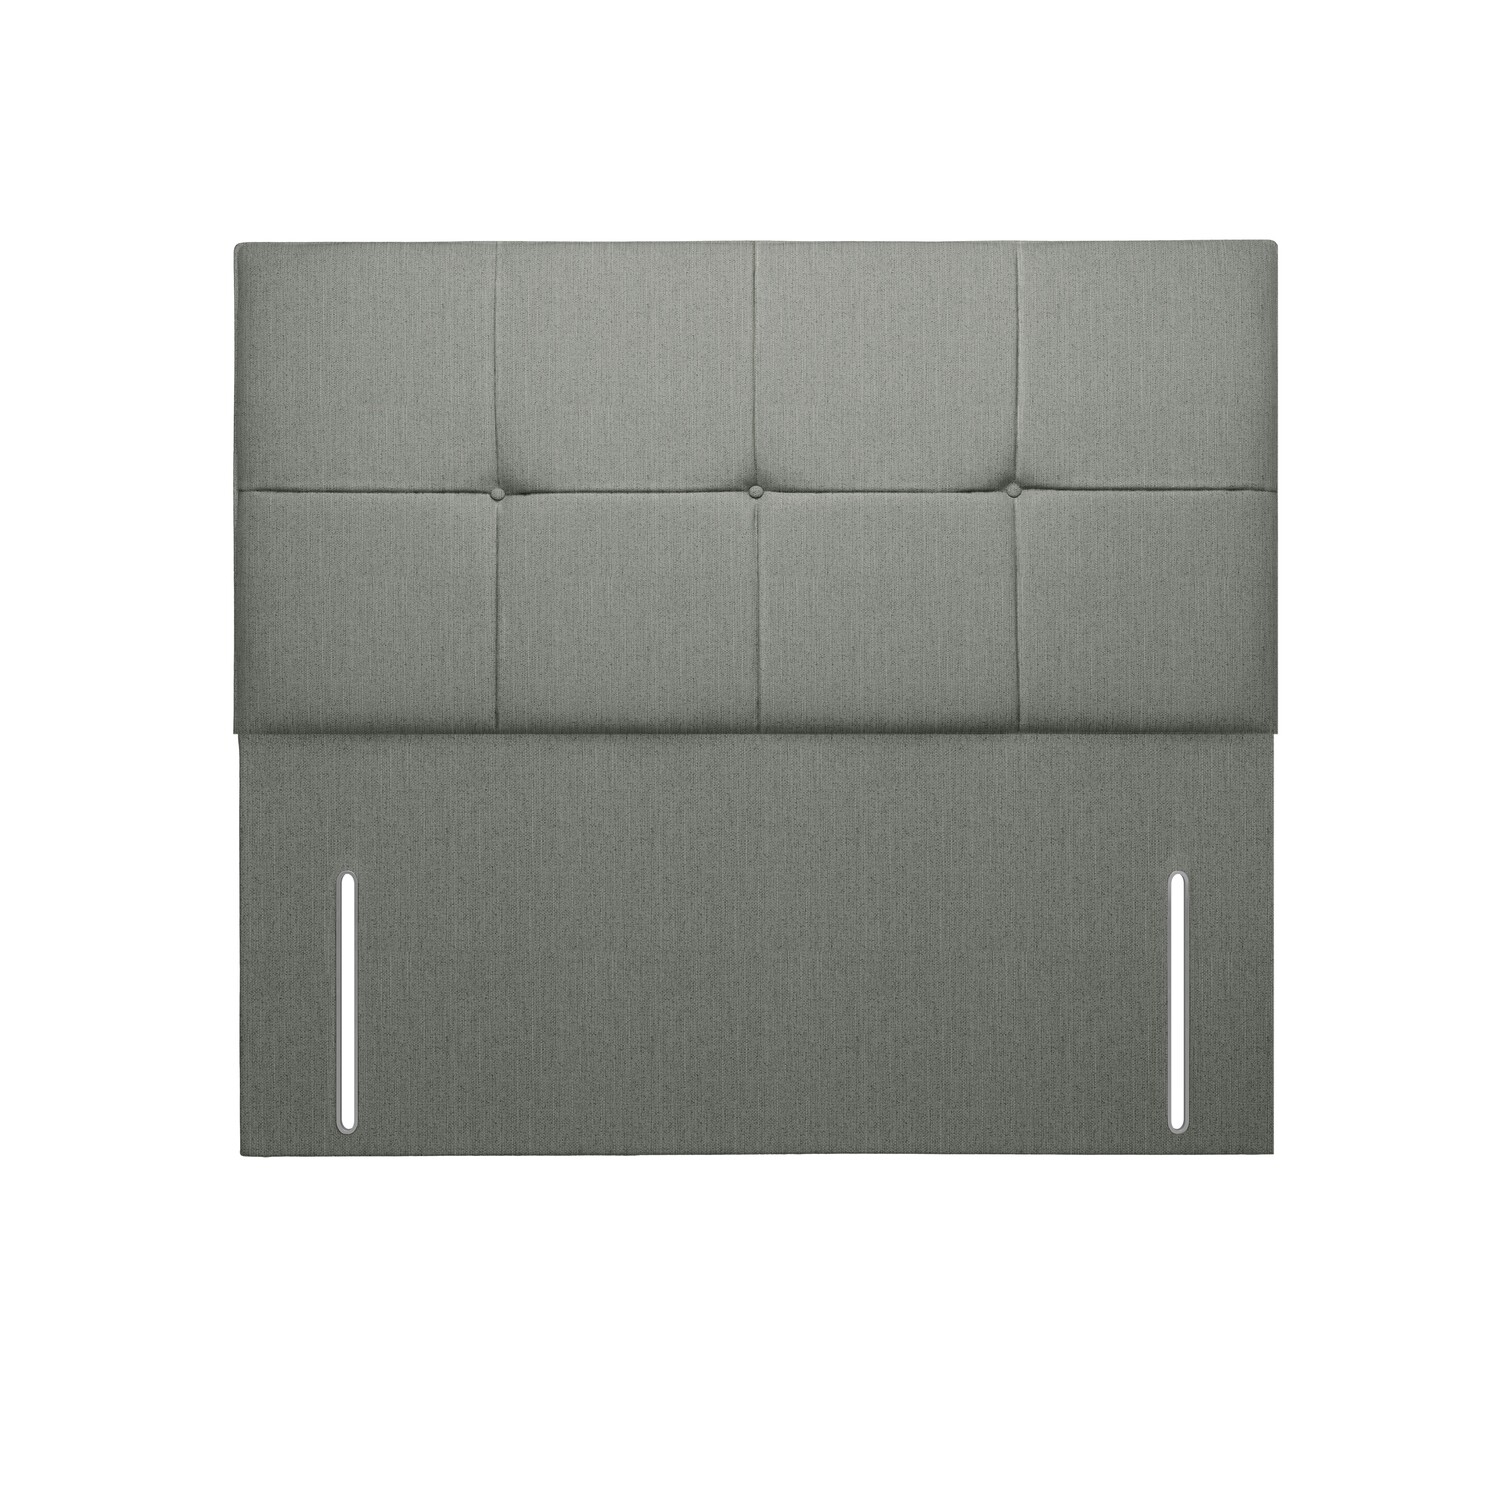 Cery`s ​ Headboard available in 135cm high and 61cm high with Struts